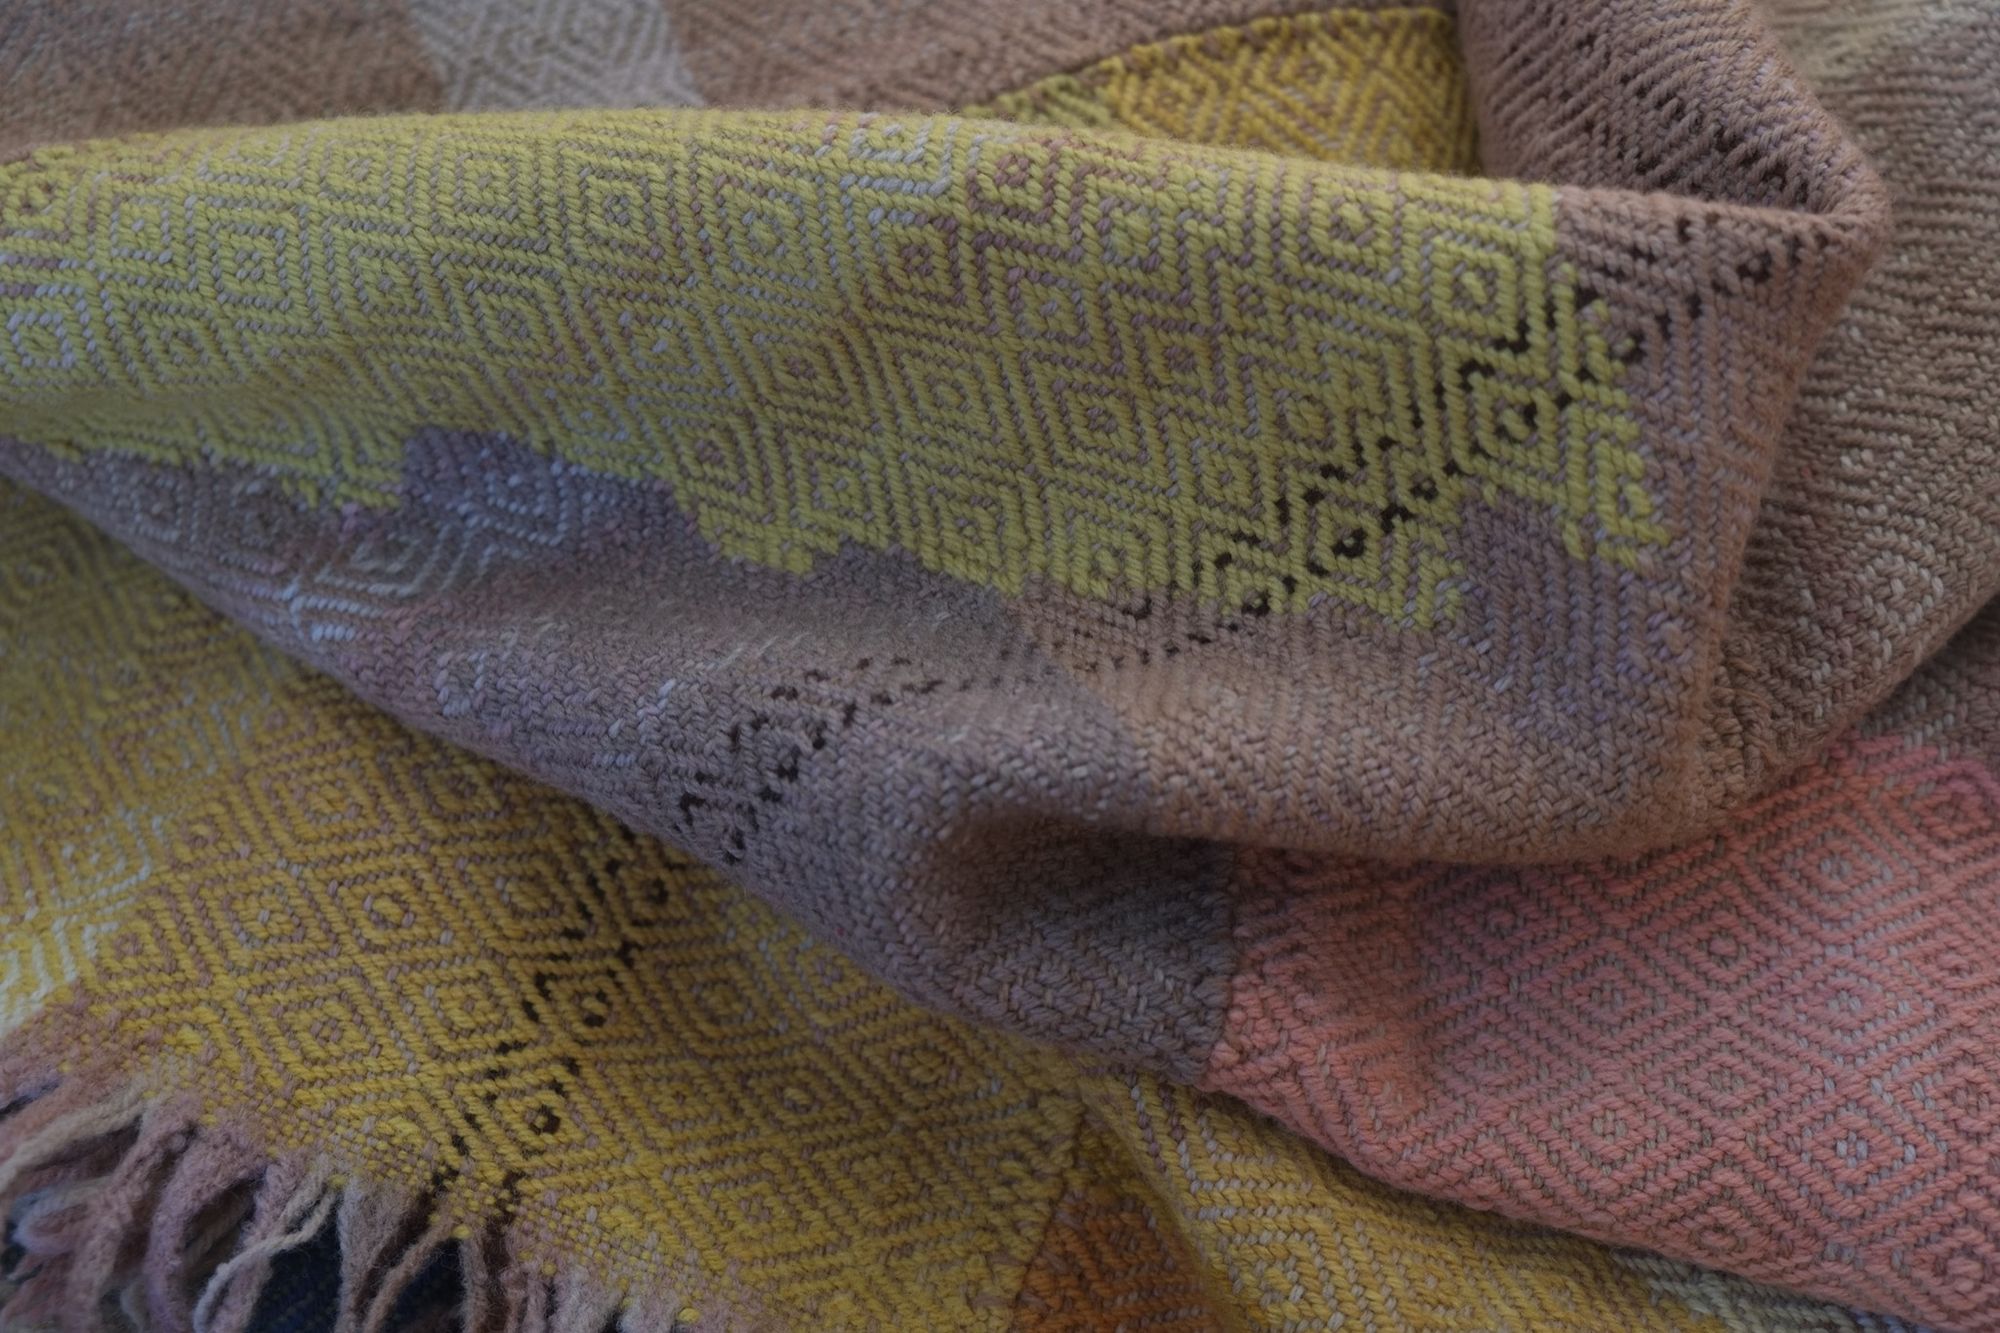 Details of a brown, pink, yellow, blue, green, tan and purple woolen blanket with a diamond pattern.